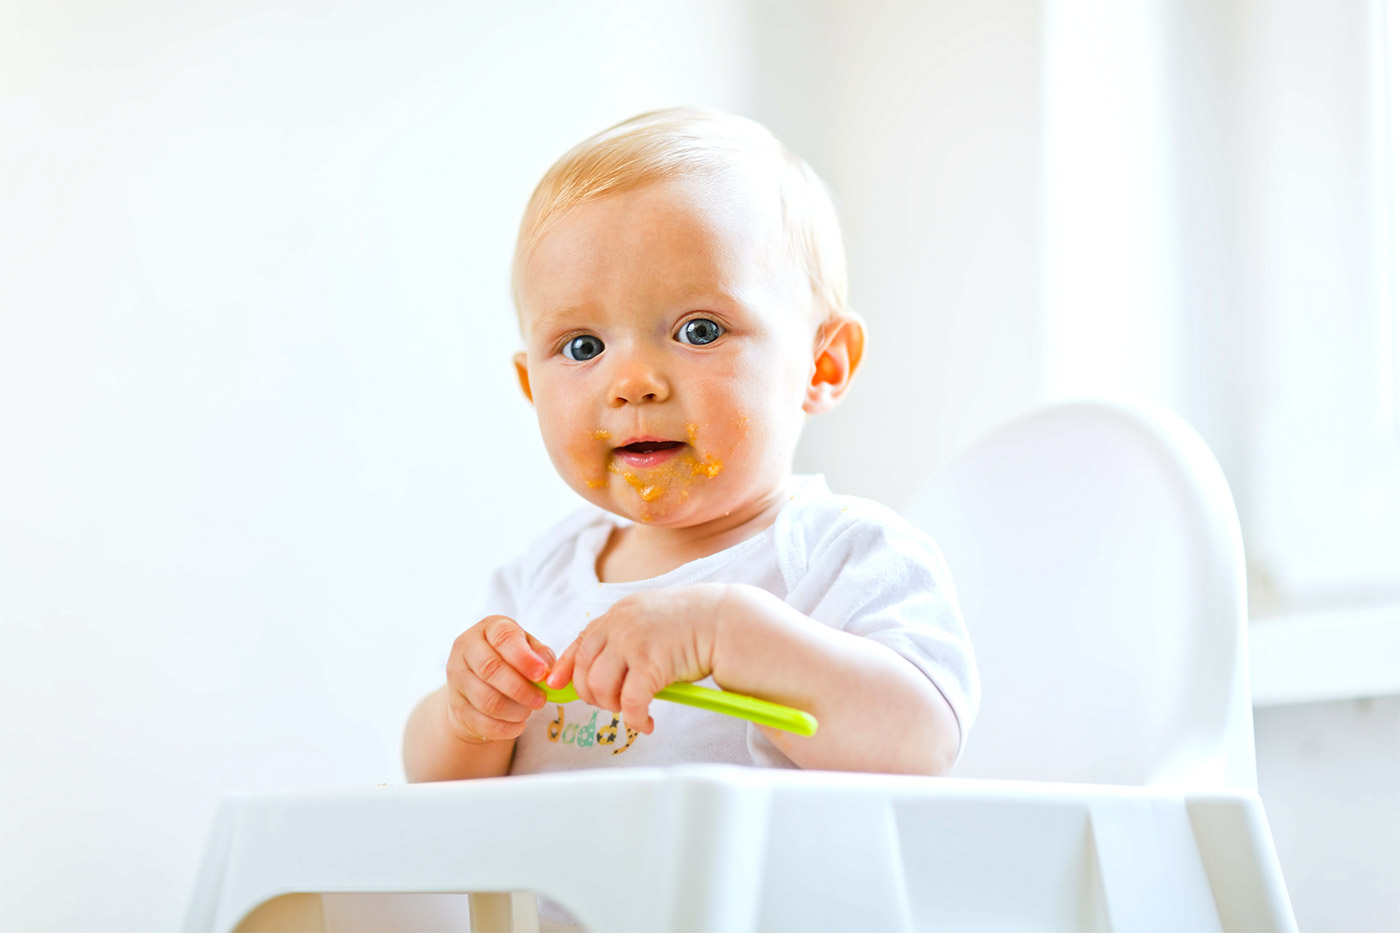 How to make baby food at home